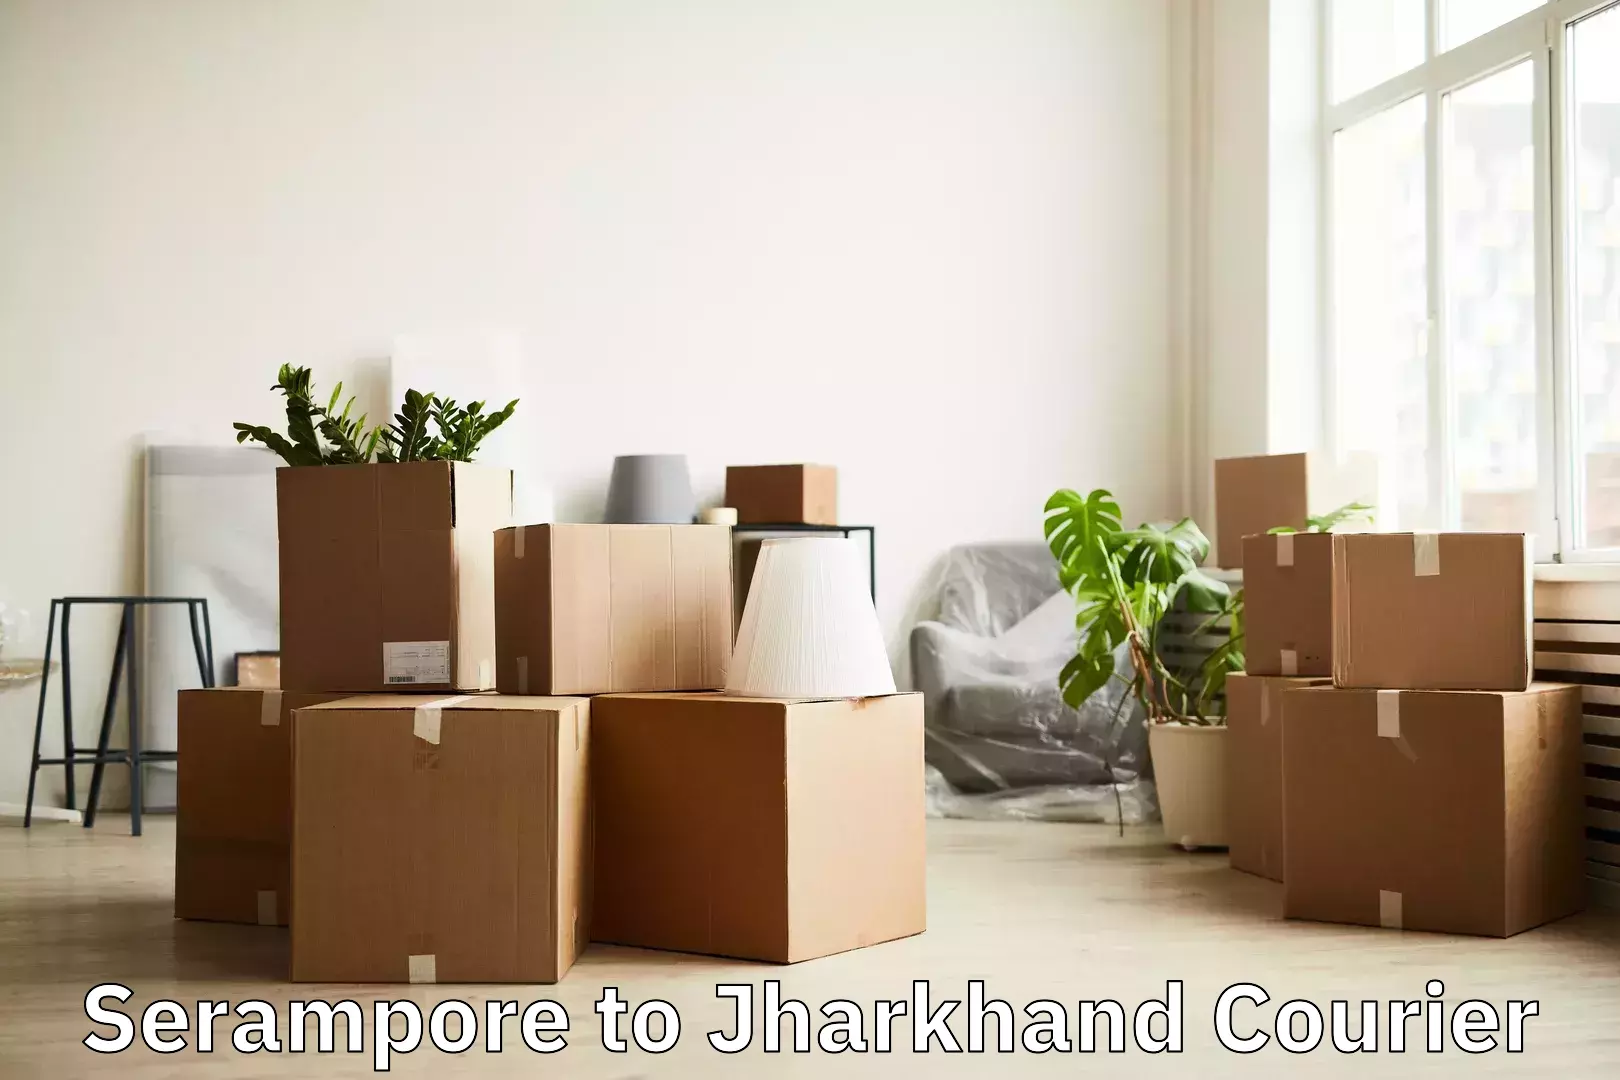 Baggage transport technology Serampore to Jharkhand